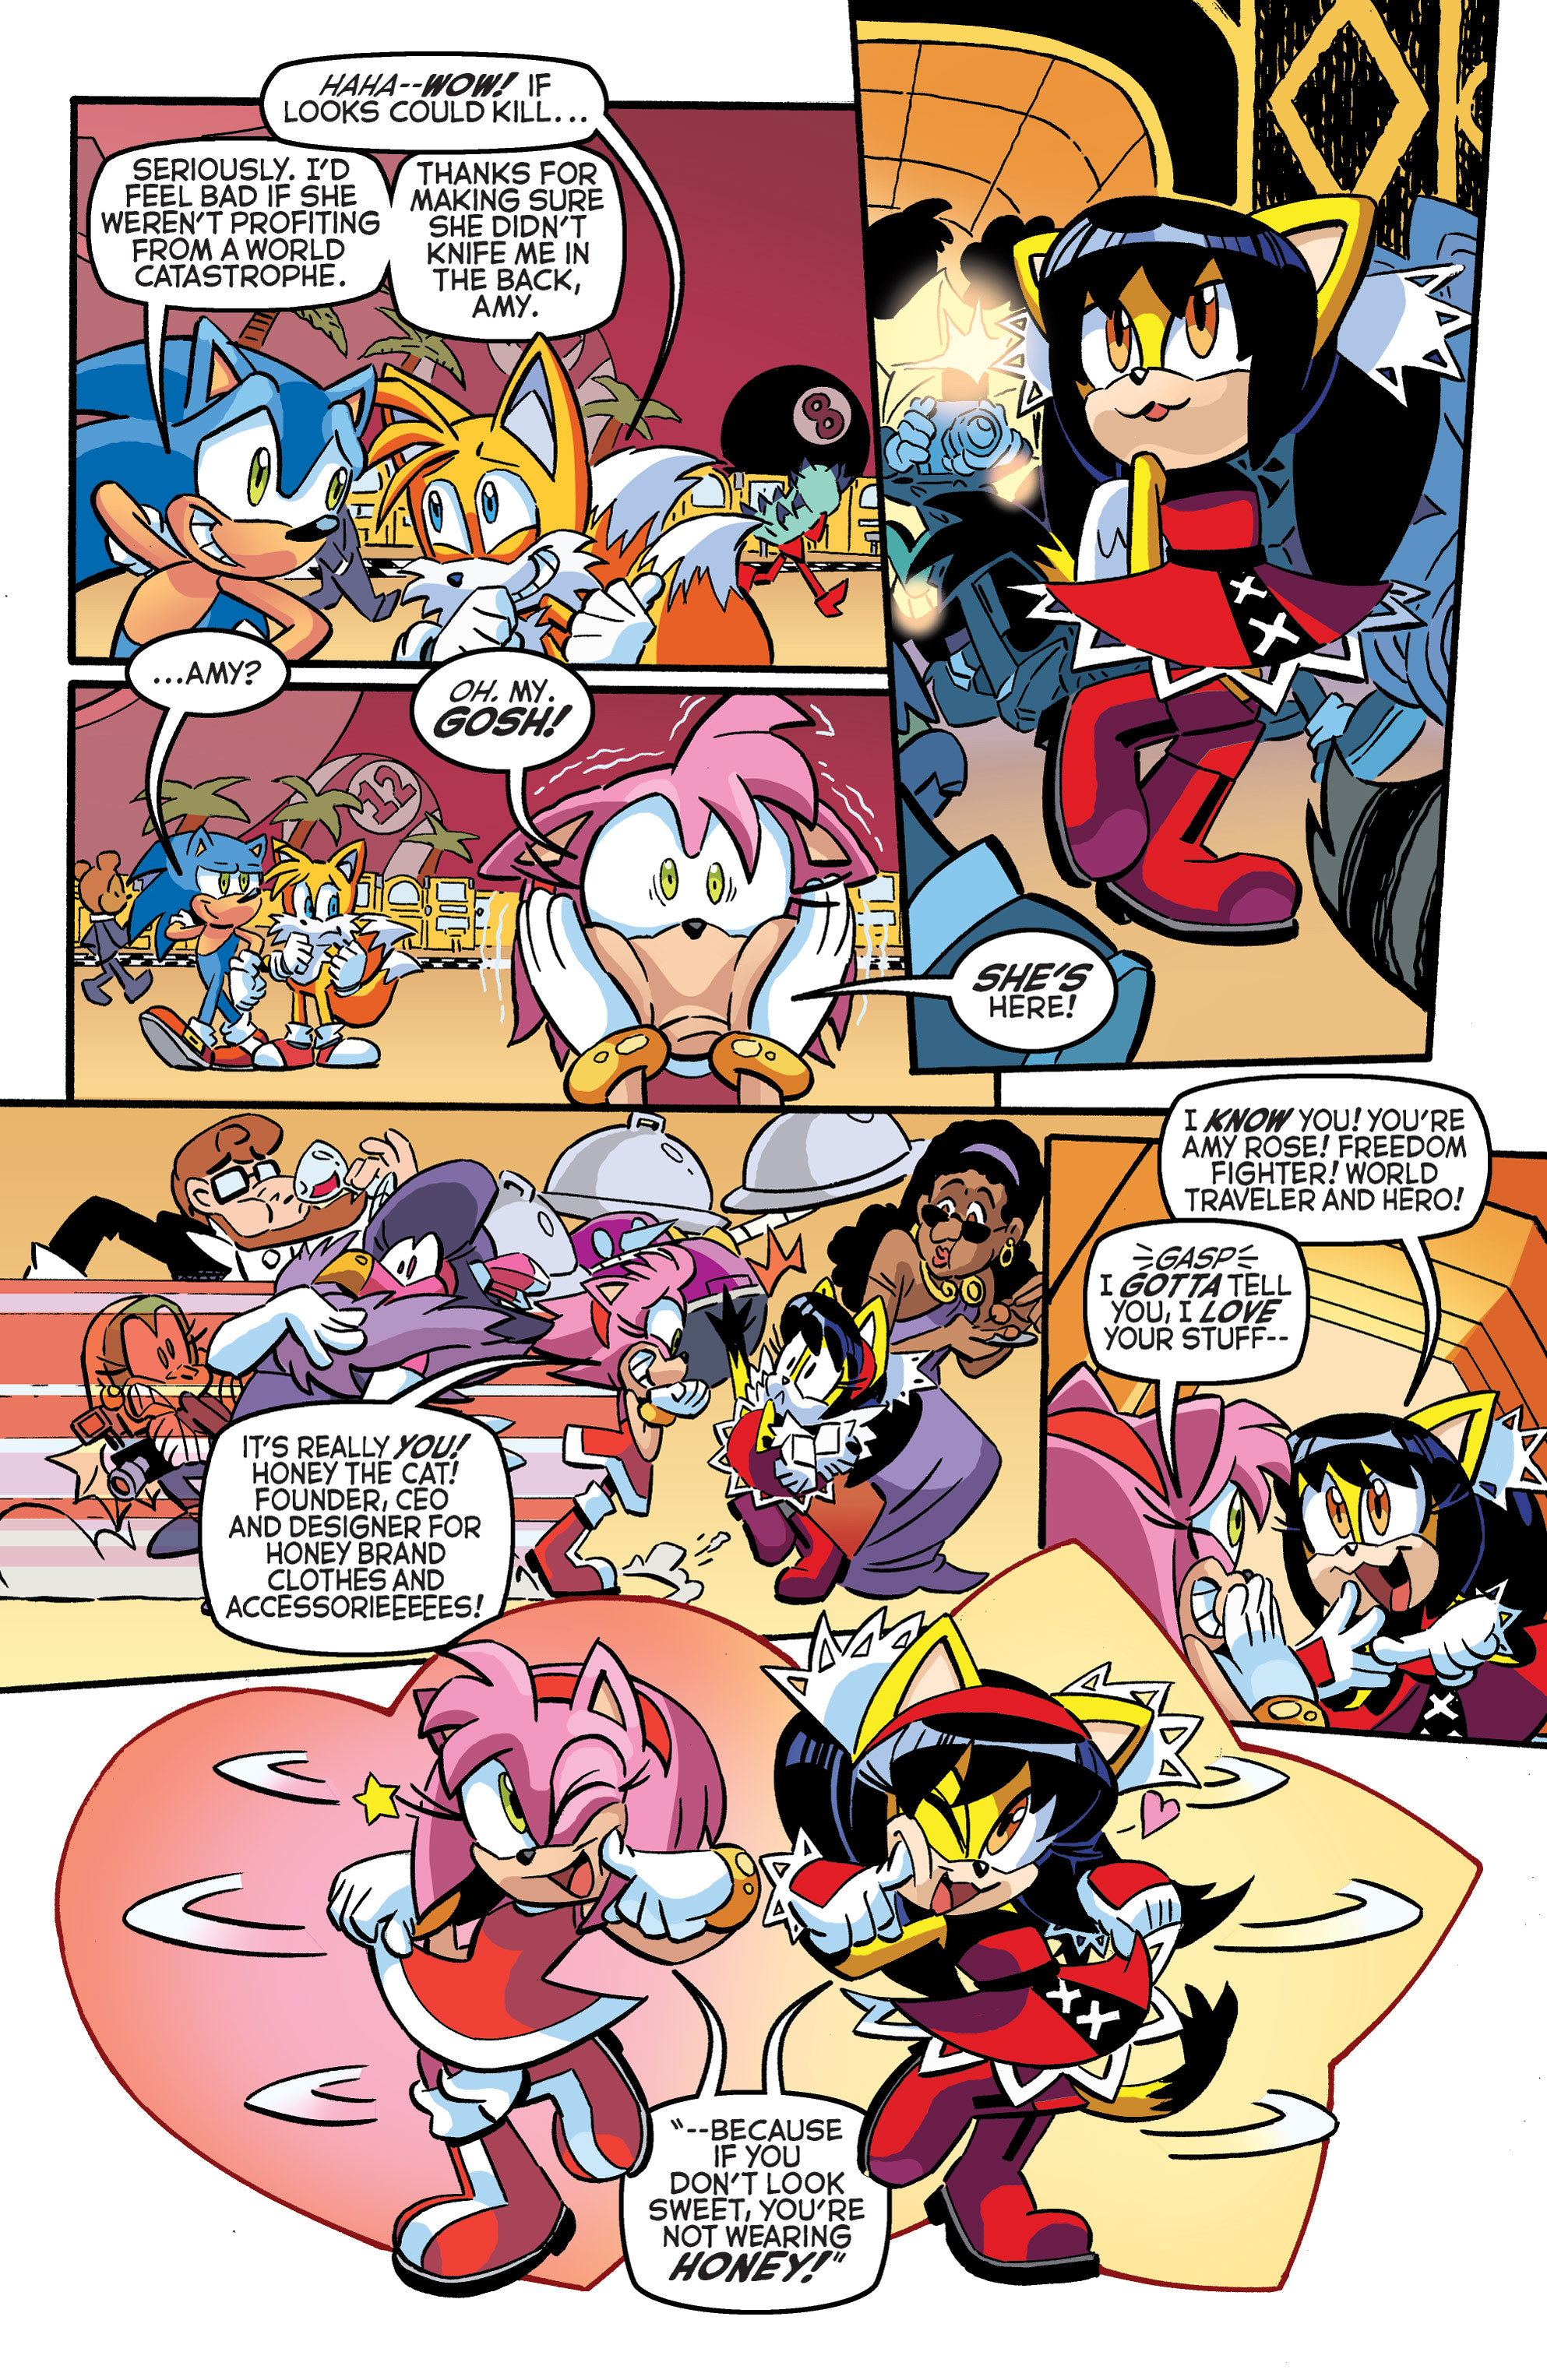 580 Sonamy ideas in 2023  sonic and amy, sonic, sonic the hedgehog